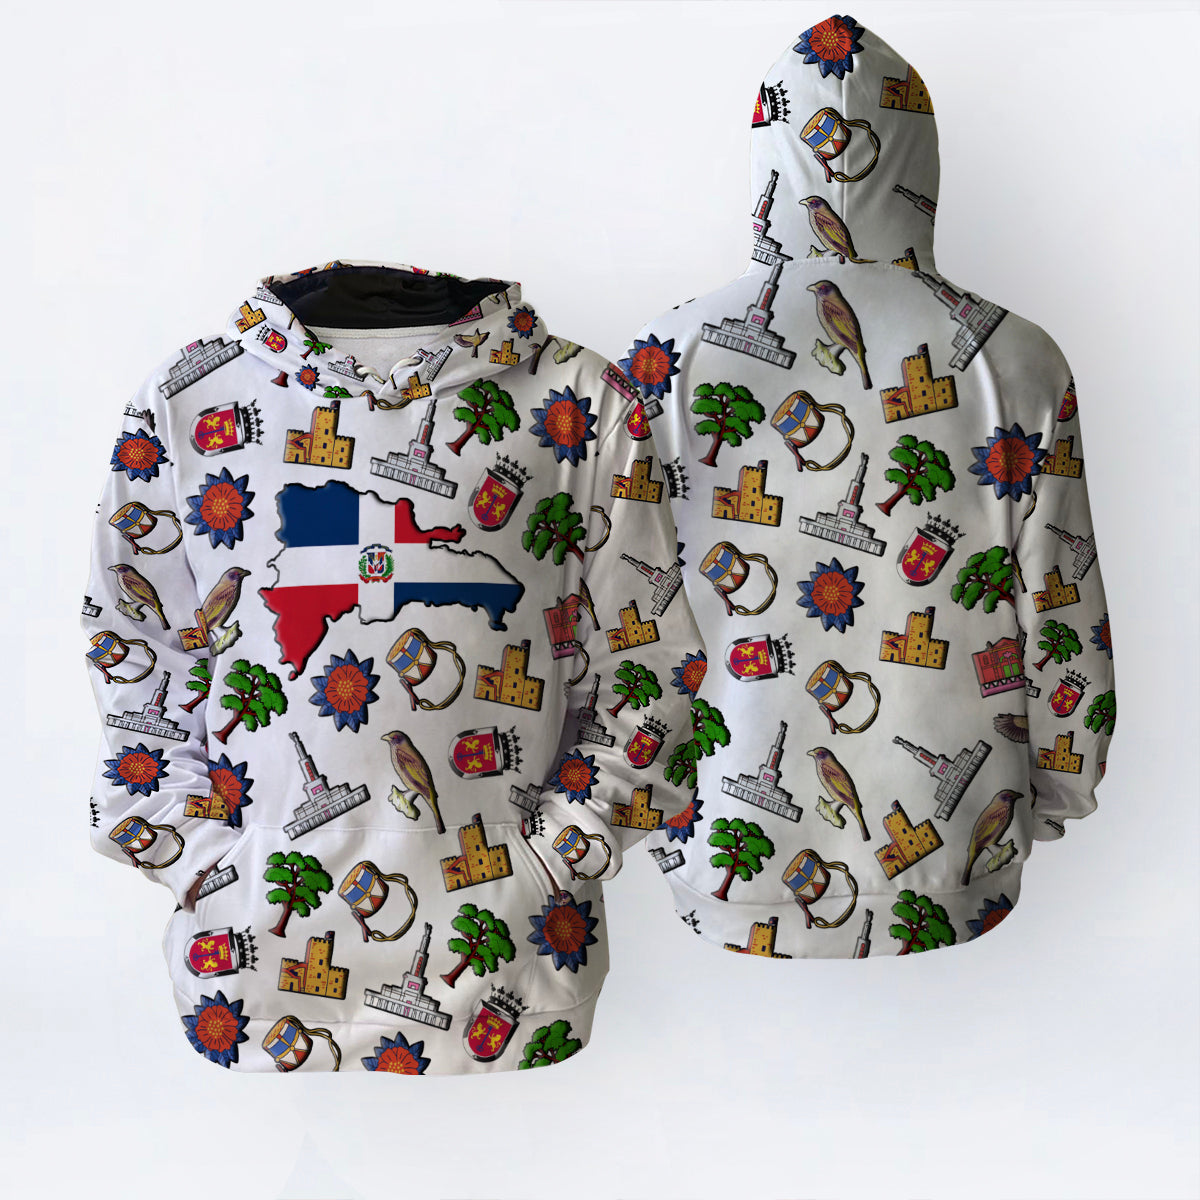 Dominican All Over Print Hoodie With Dominican Flag And Symbols